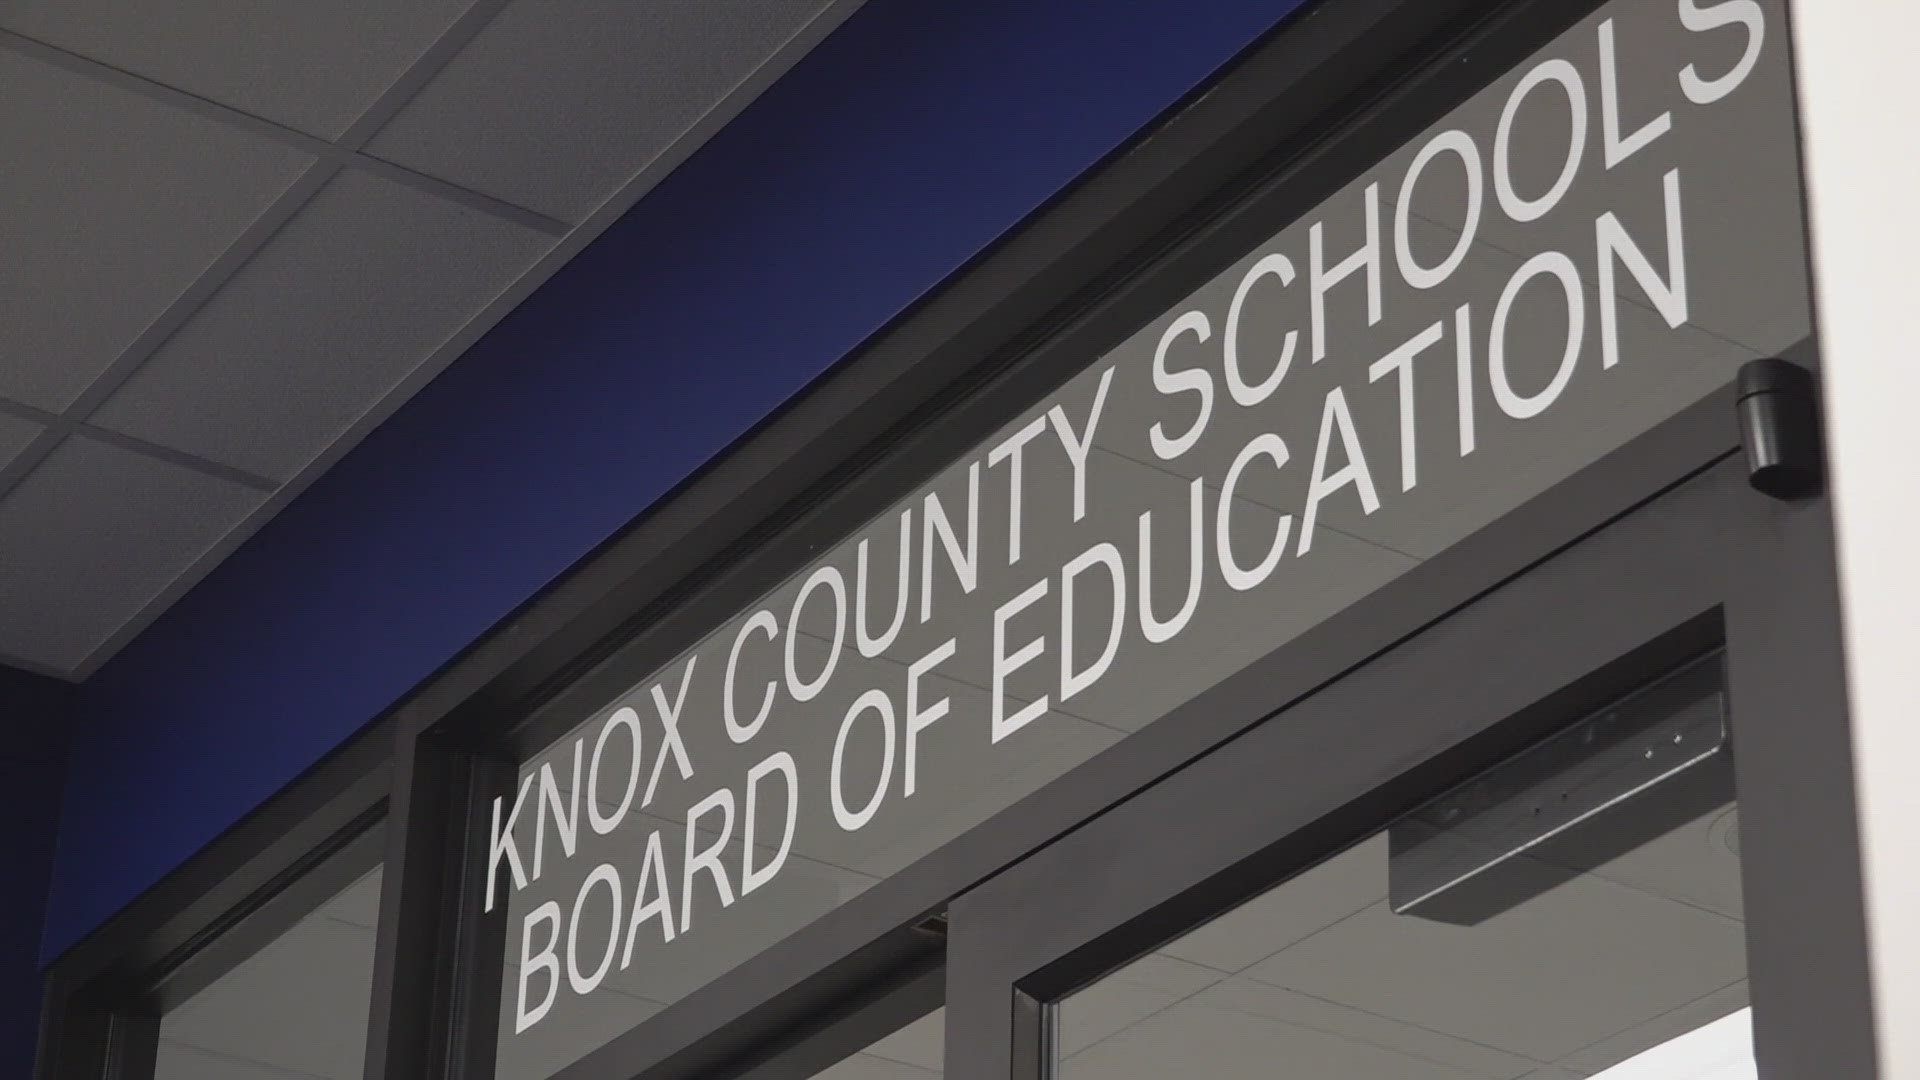 Materials can already be challenged in Knox County Schools if parents believe they aren't appropriate for students.